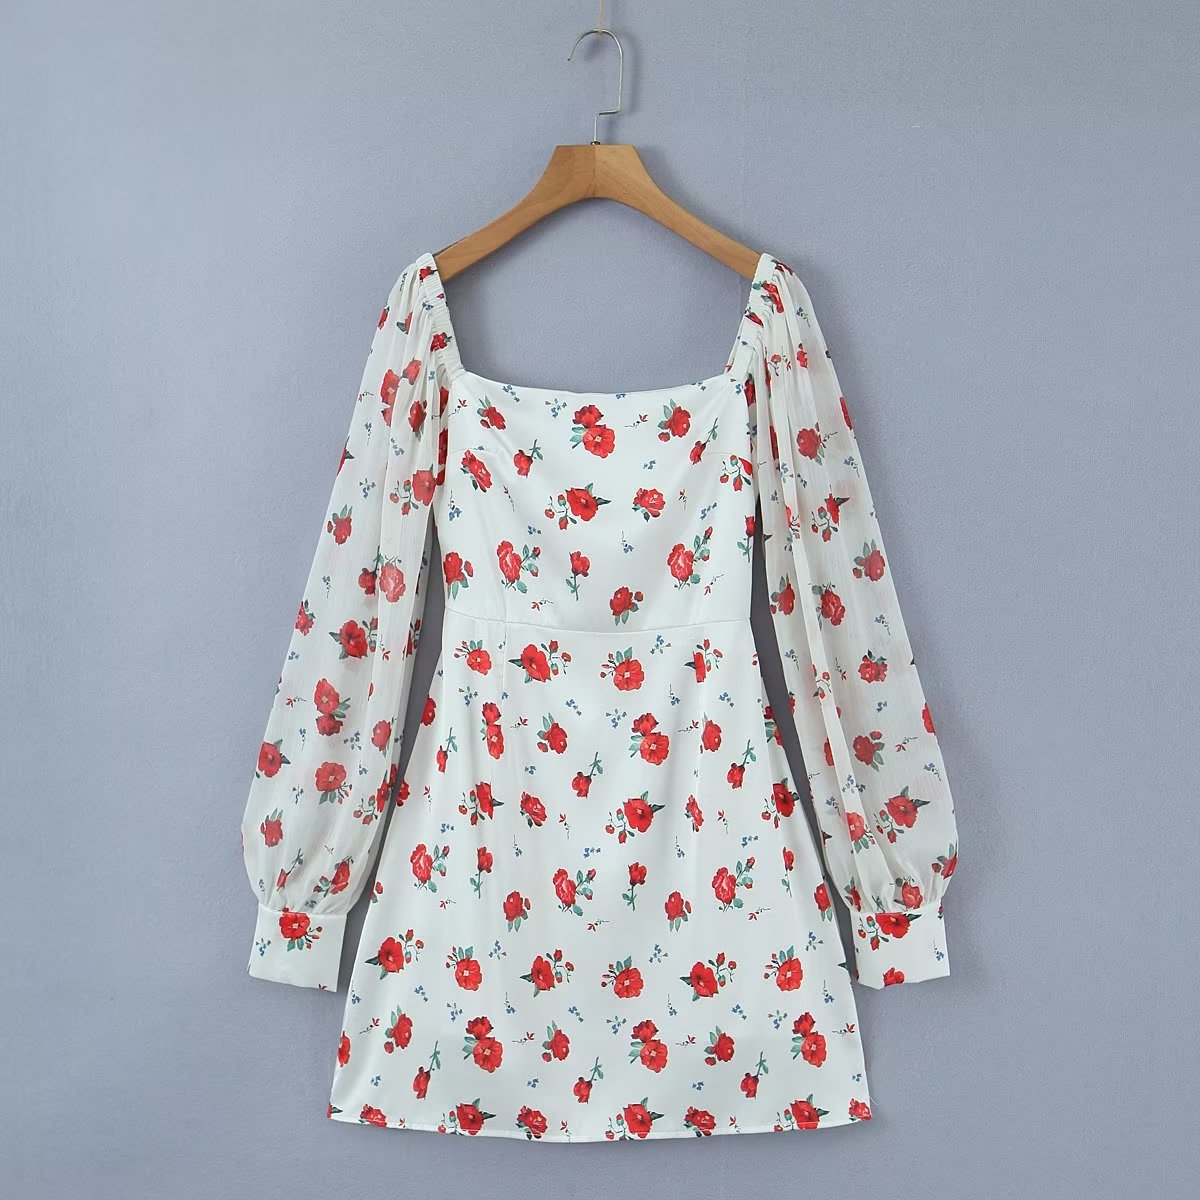 Pullover Square Collar Short Sleeve Elastic Knitted Floral Print Dress Women Clothing Yama